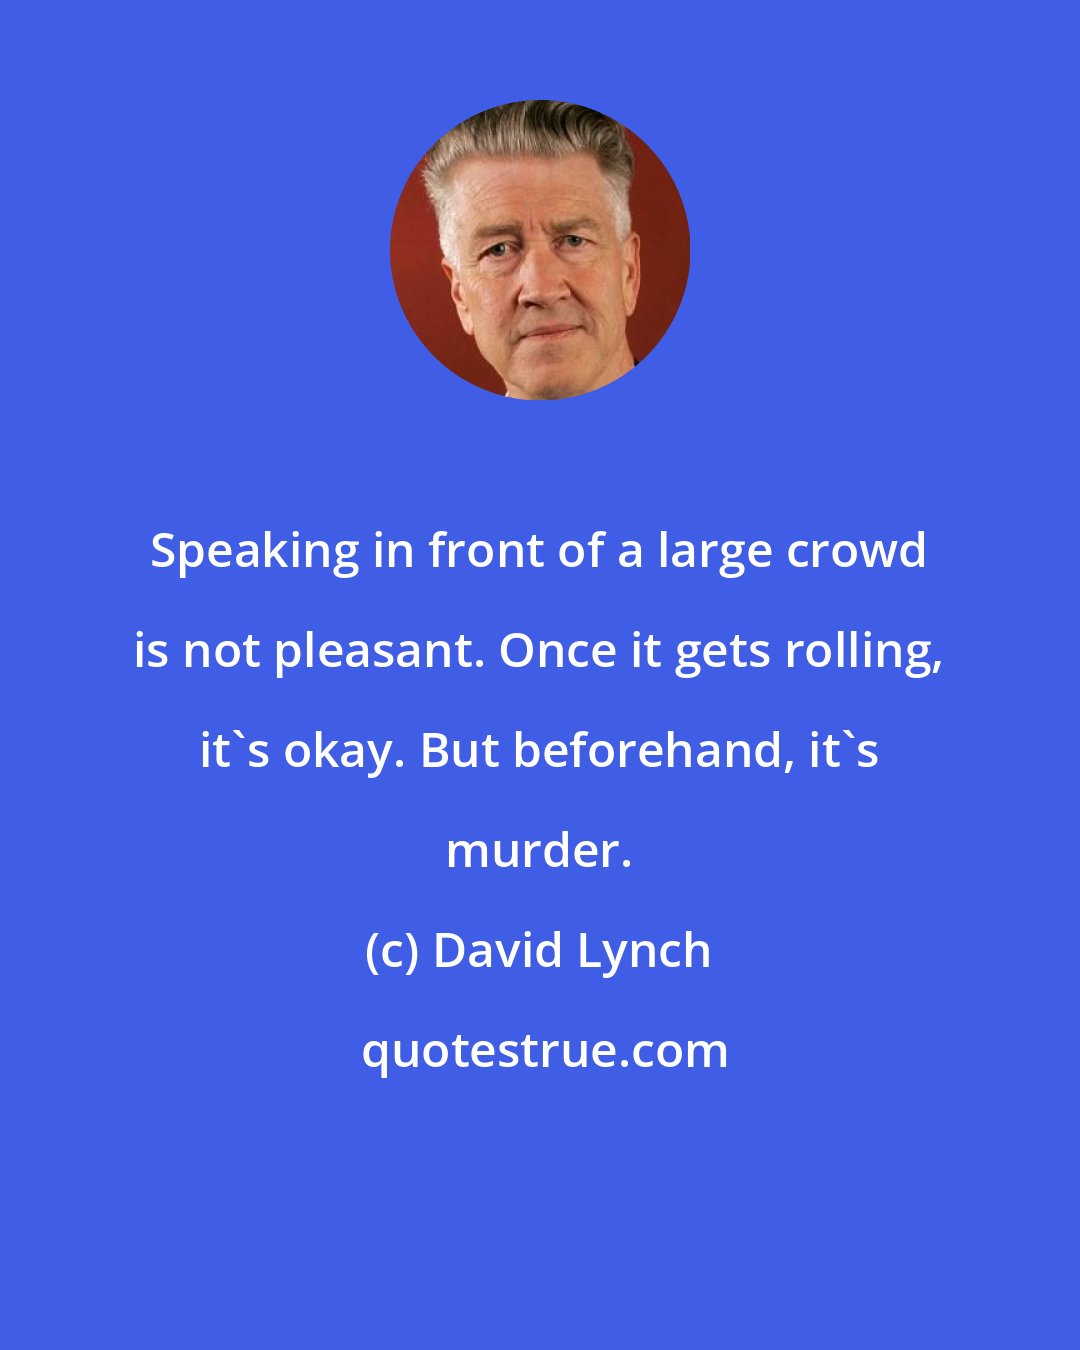 David Lynch: Speaking in front of a large crowd is not pleasant. Once it gets rolling, it's okay. But beforehand, it's murder.